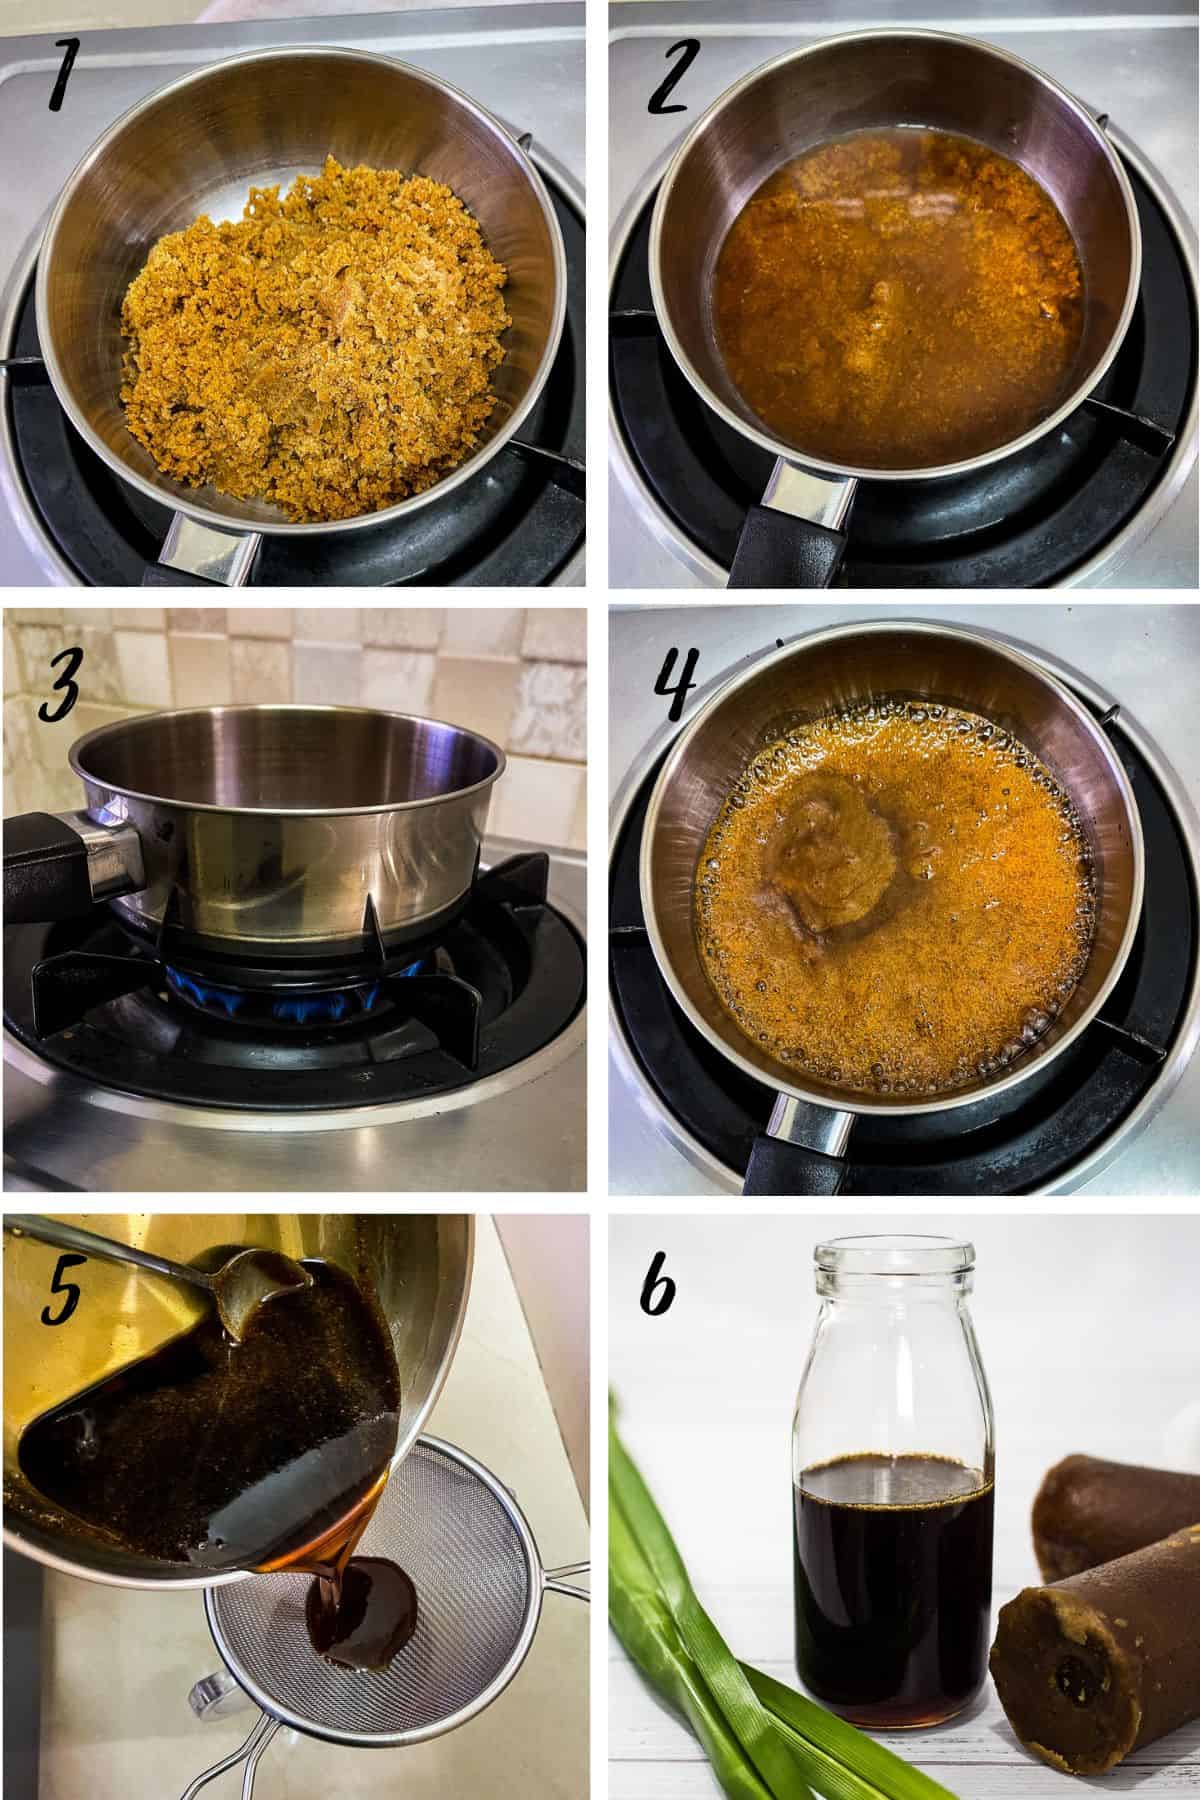 A poster of 6 images showing how to make gula melaka syrup.